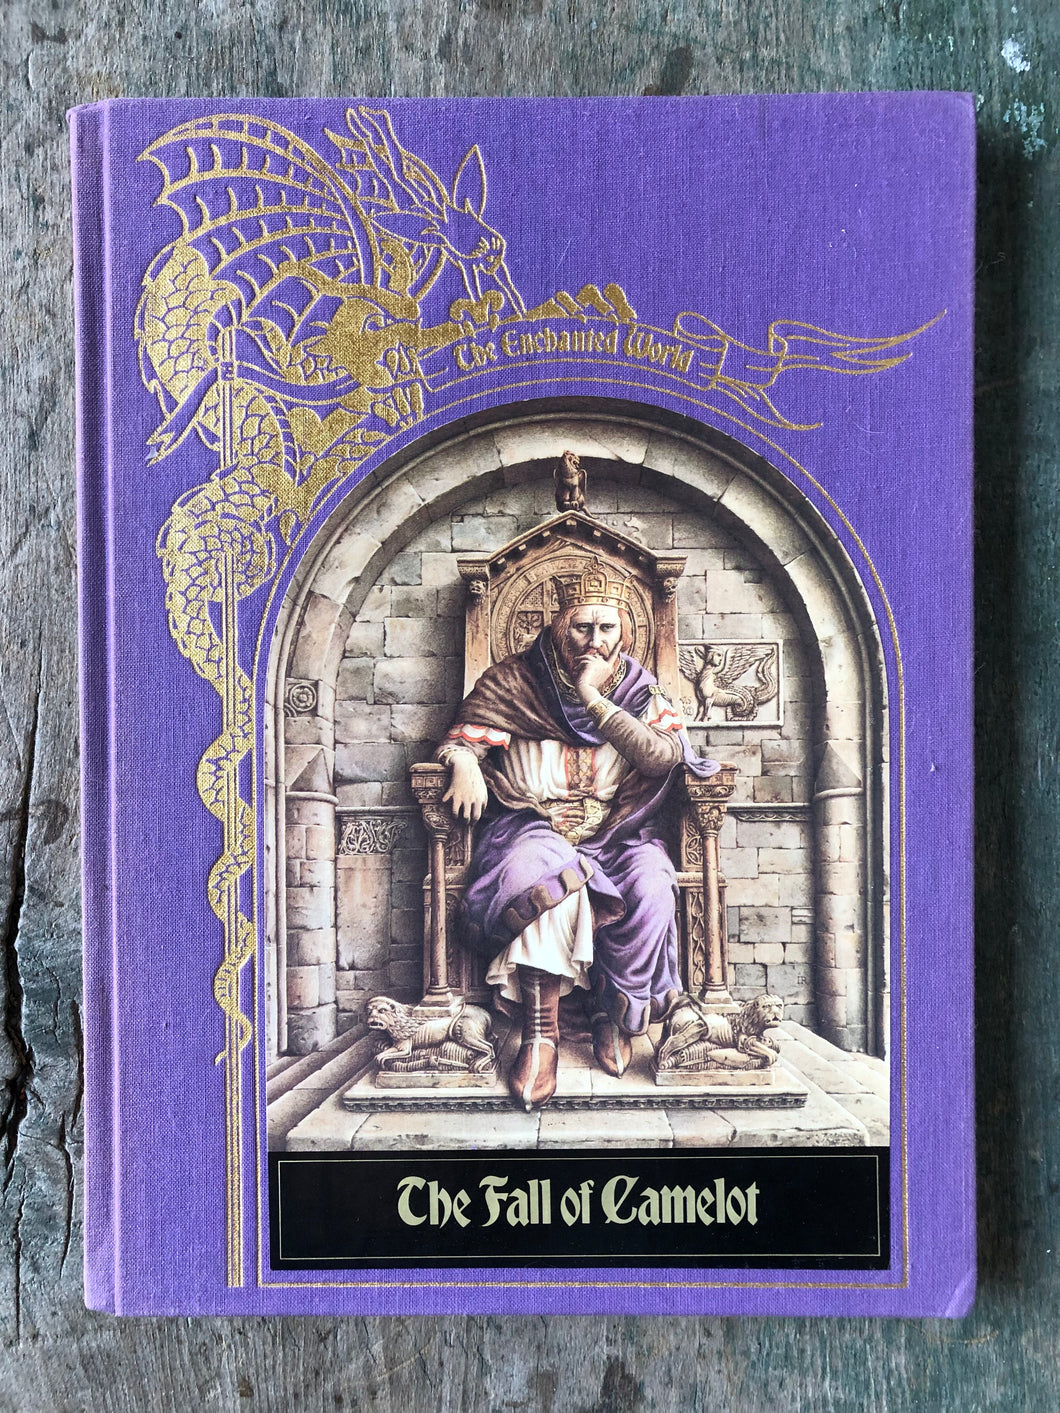 The Enchanted World: The Fall of Camelot by the Editors of Time-Life Books